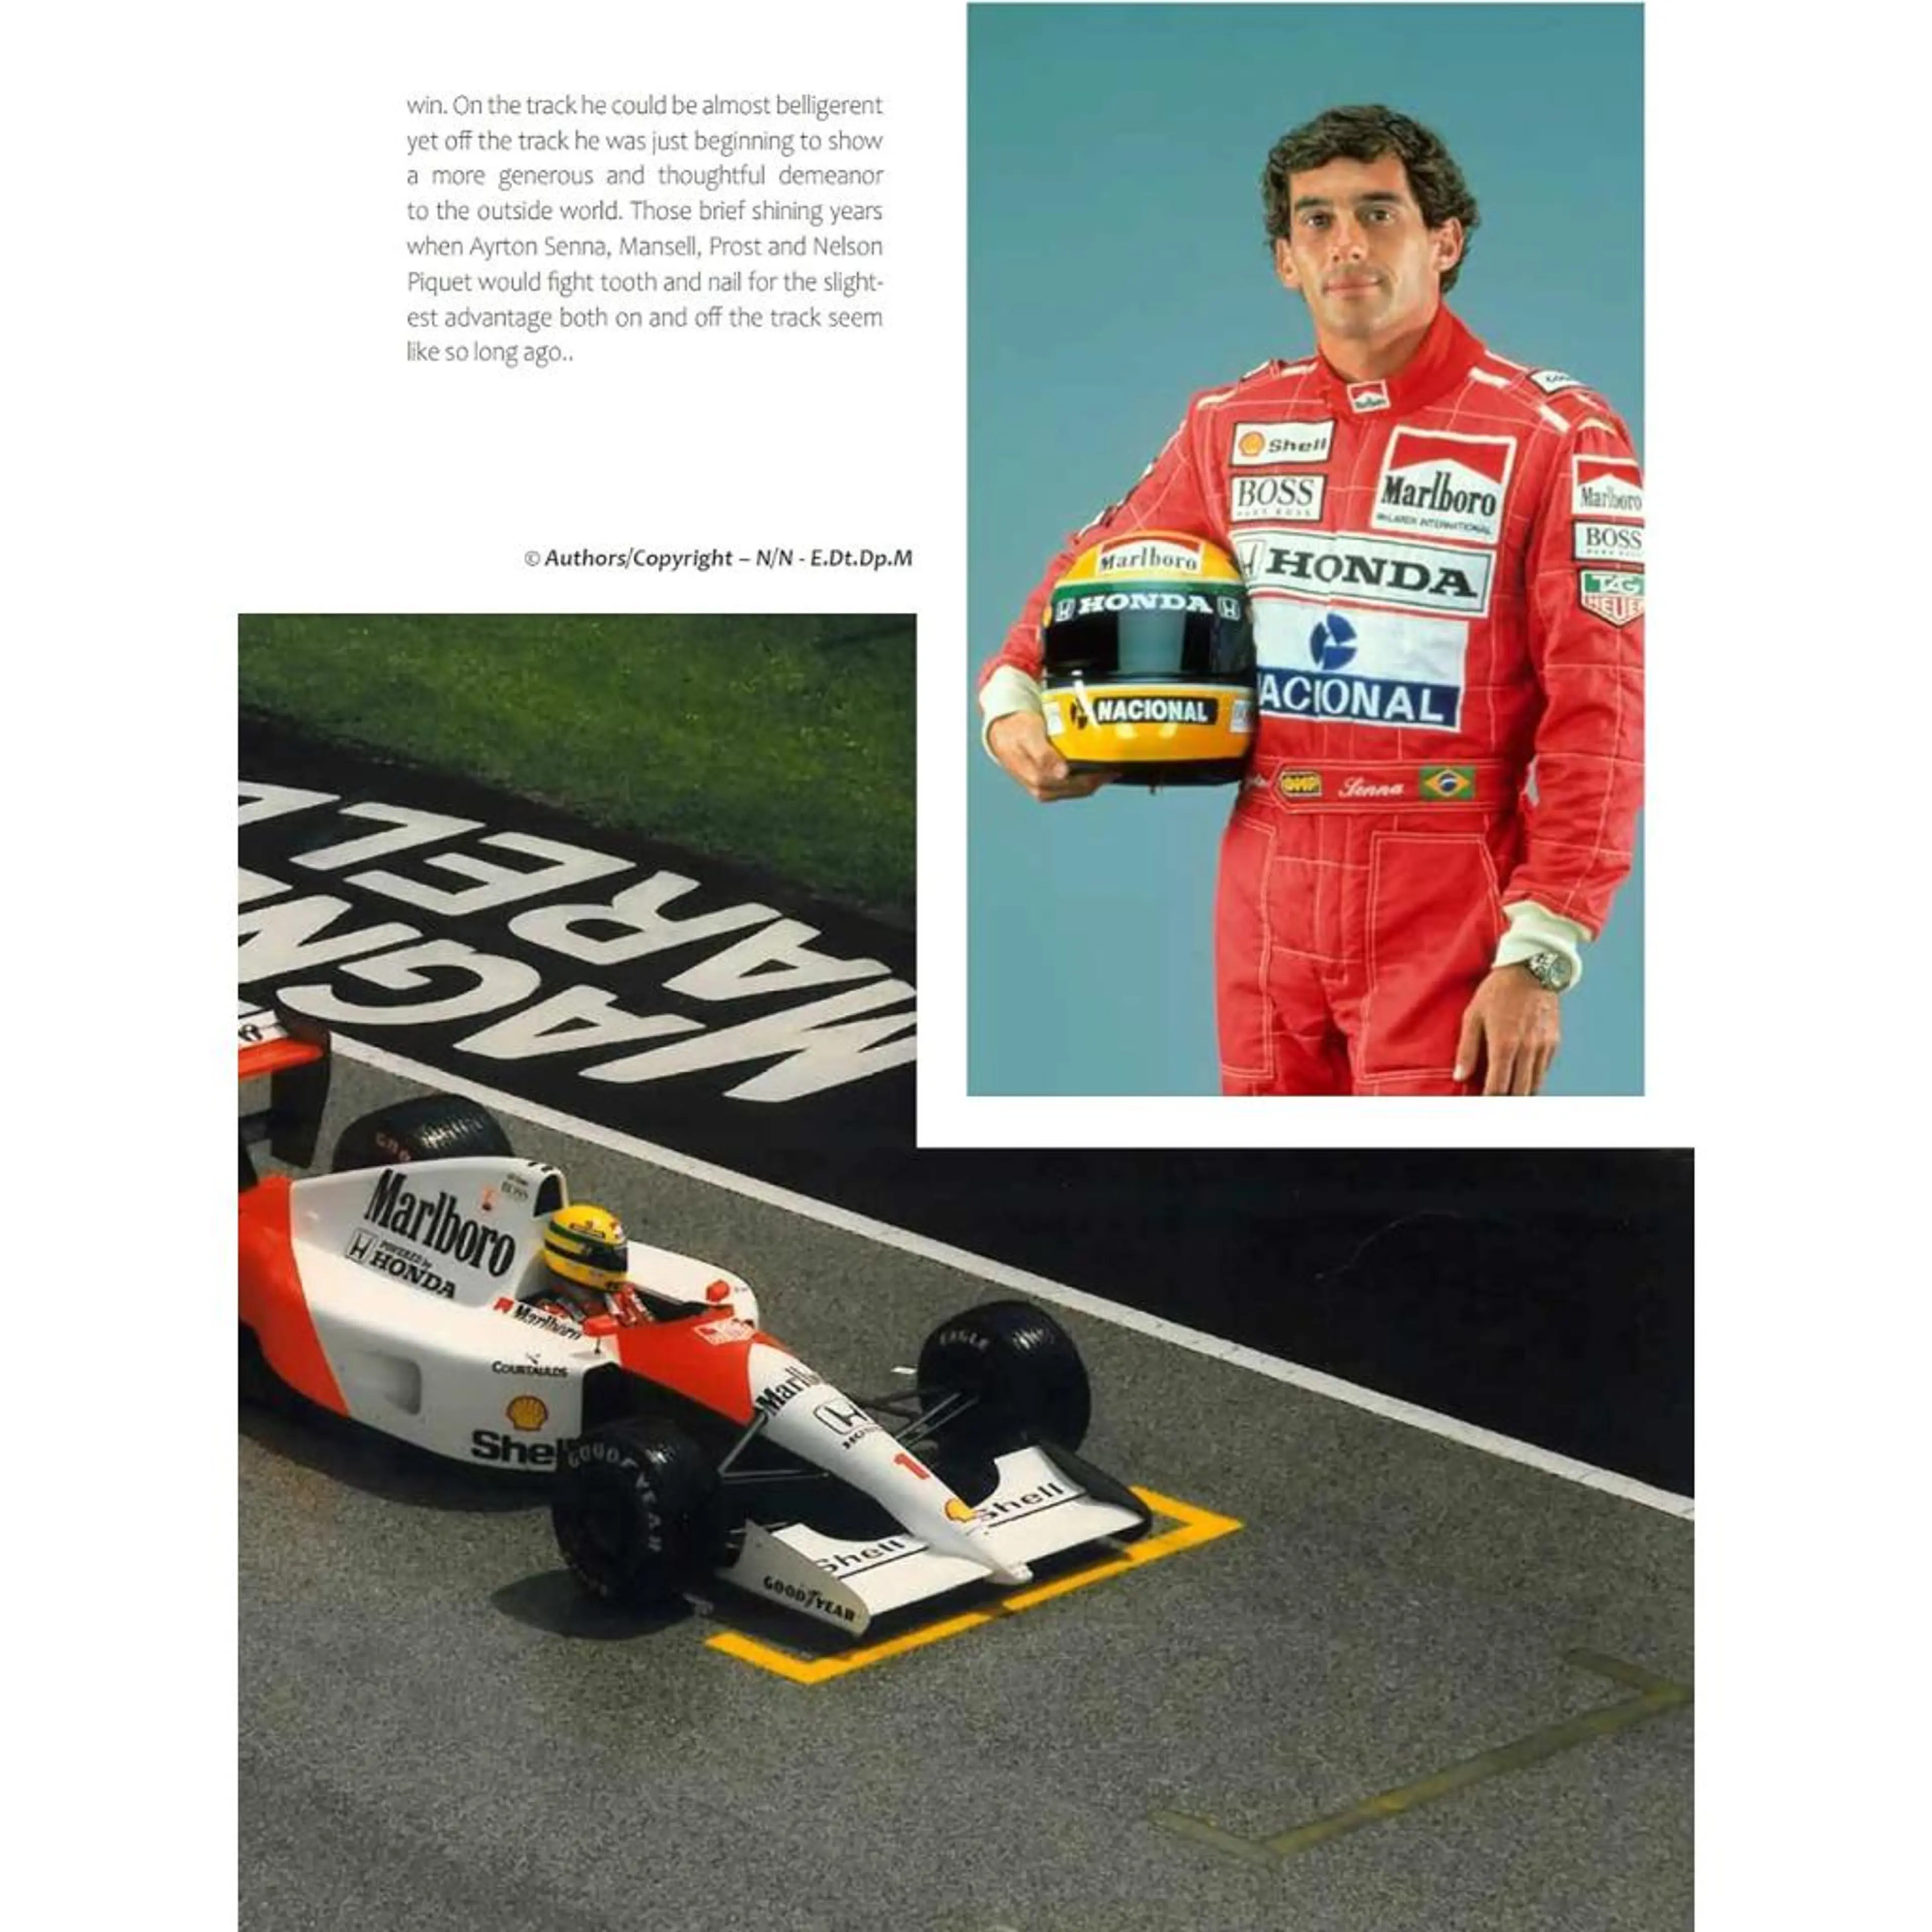 70 Years Formula 1 Encyclopedia - The Most Complete Formula 1 Encyclopedia Yet - Collector's Edition